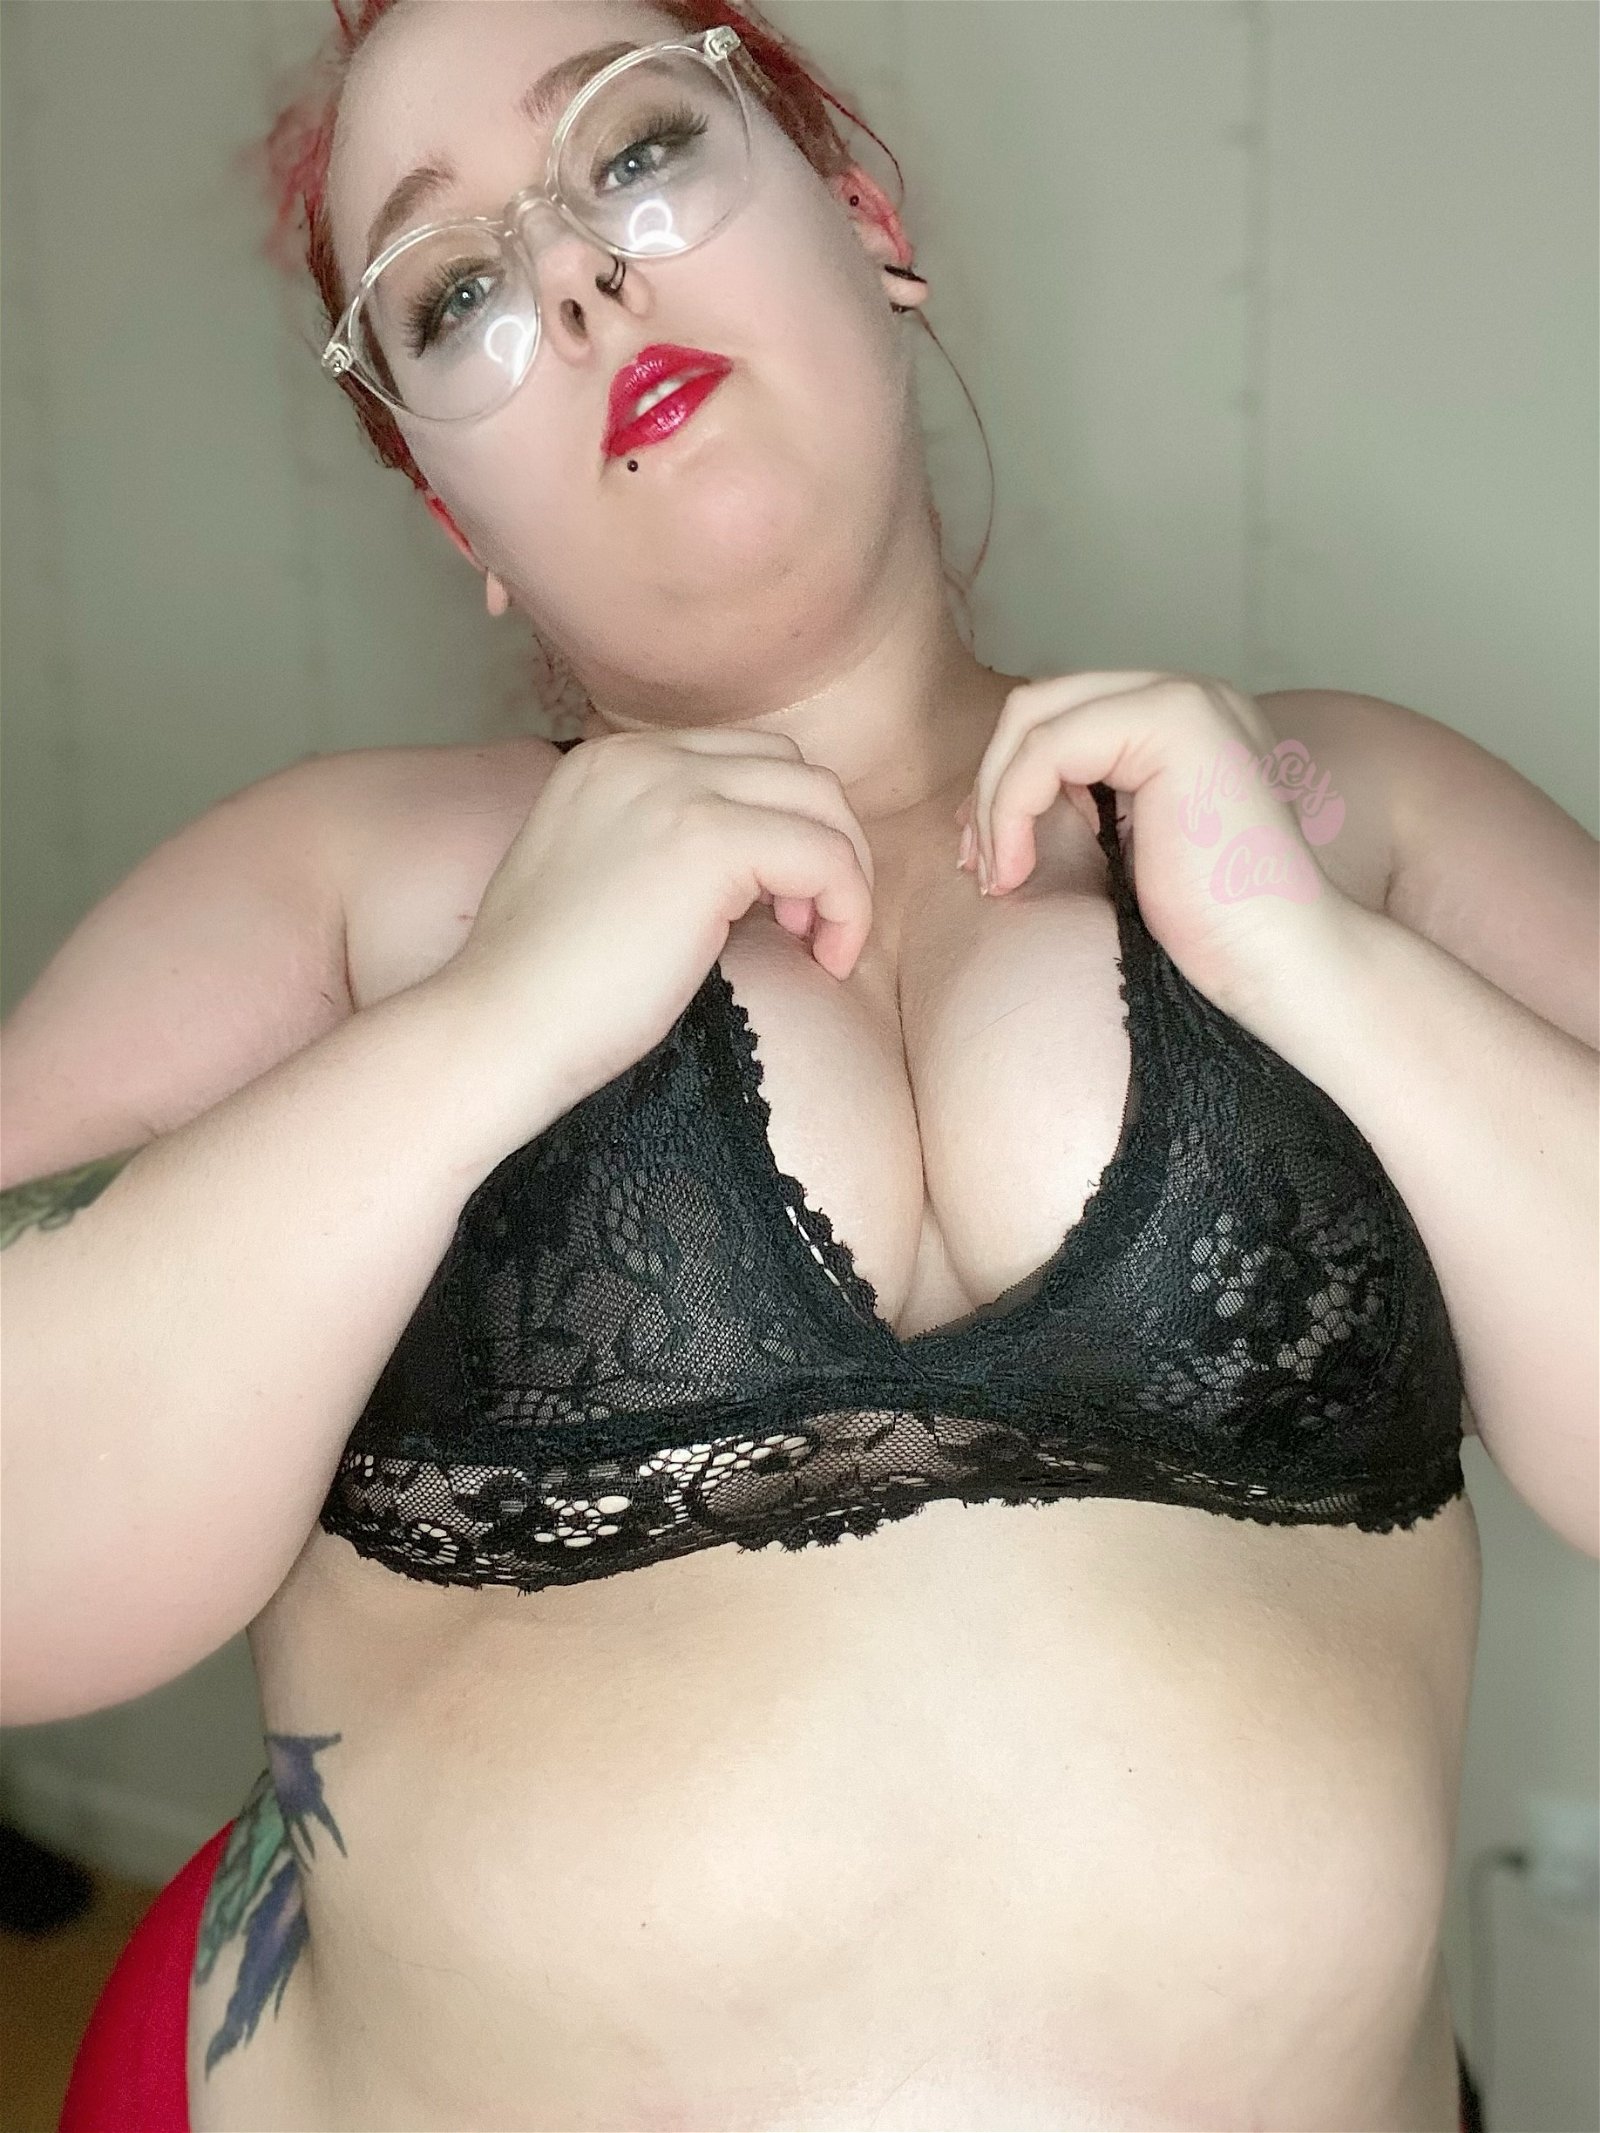 Photo by Honey Cat with the username @HoneyCat, who is a star user,  November 3, 2020 at 3:45 PM. The post is about the topic Cleavage and the text says 'https://onlyfans.com/goddesshoneycatt 🆓
https://onlyfans.com/misshoneycatt 🔞'